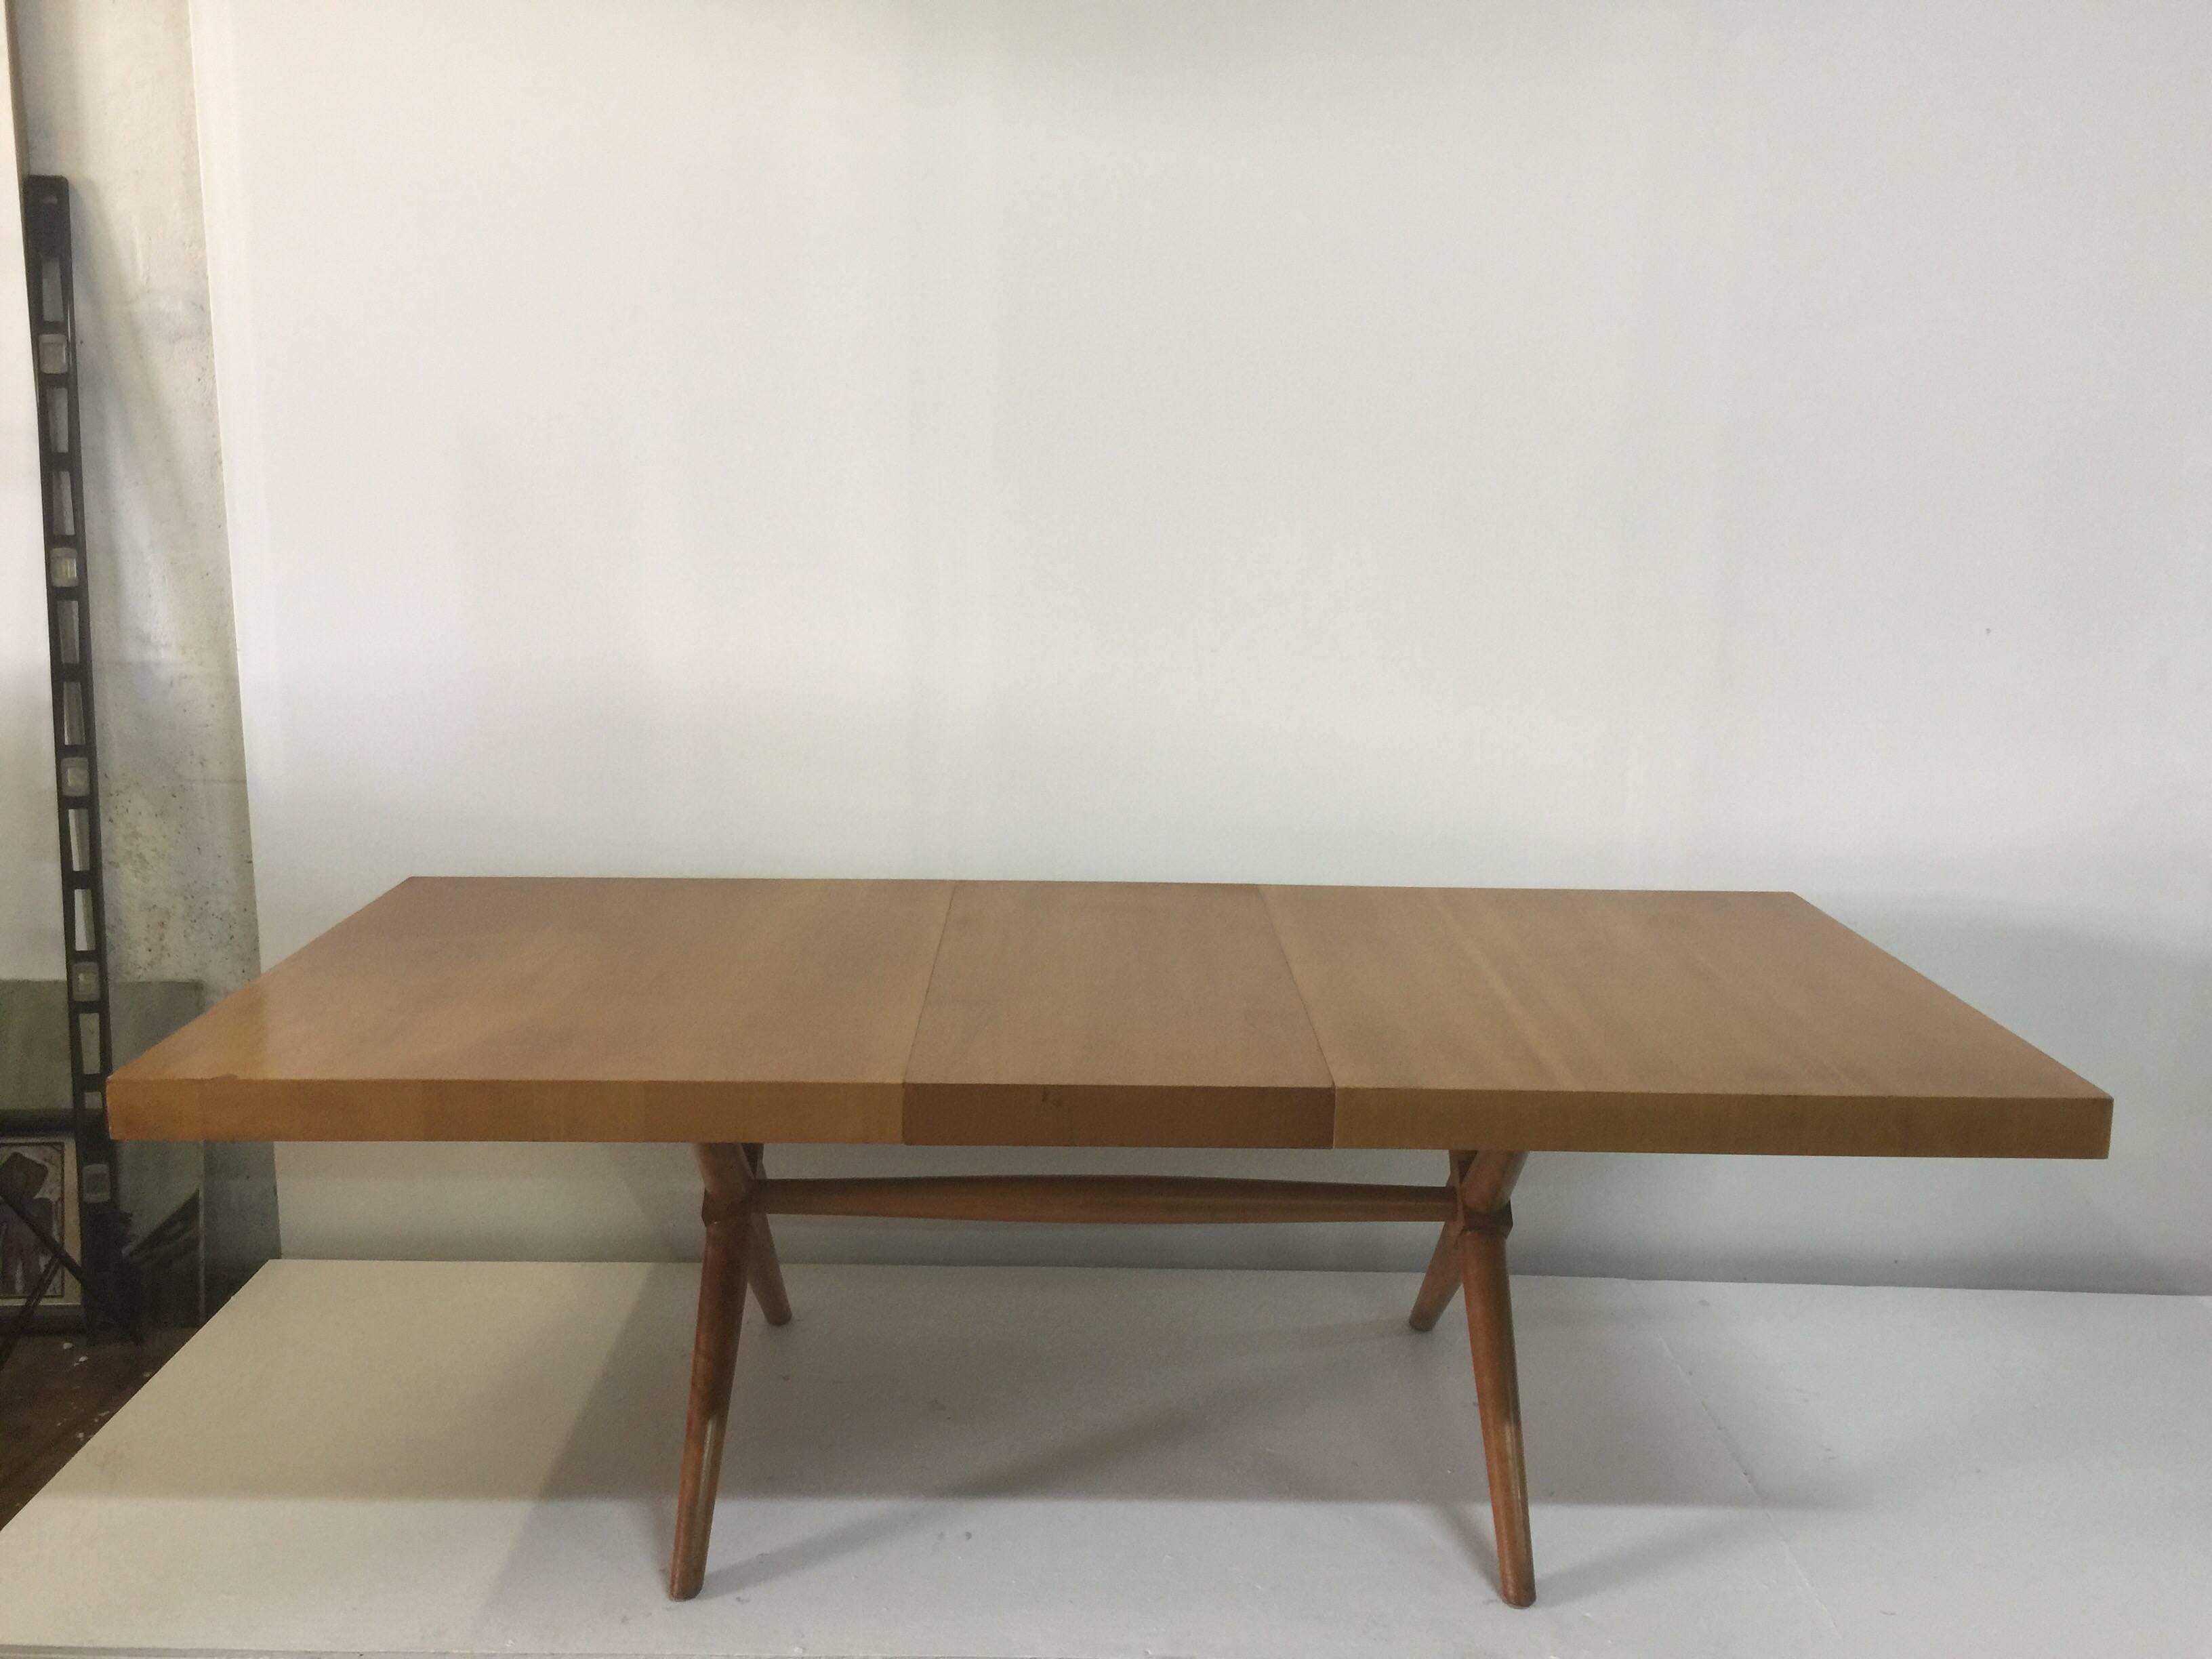 Original Vintage T.H. Robsjohn-Gibbings Dining Table with Leaf In Good Condition For Sale In East Hampton, NY